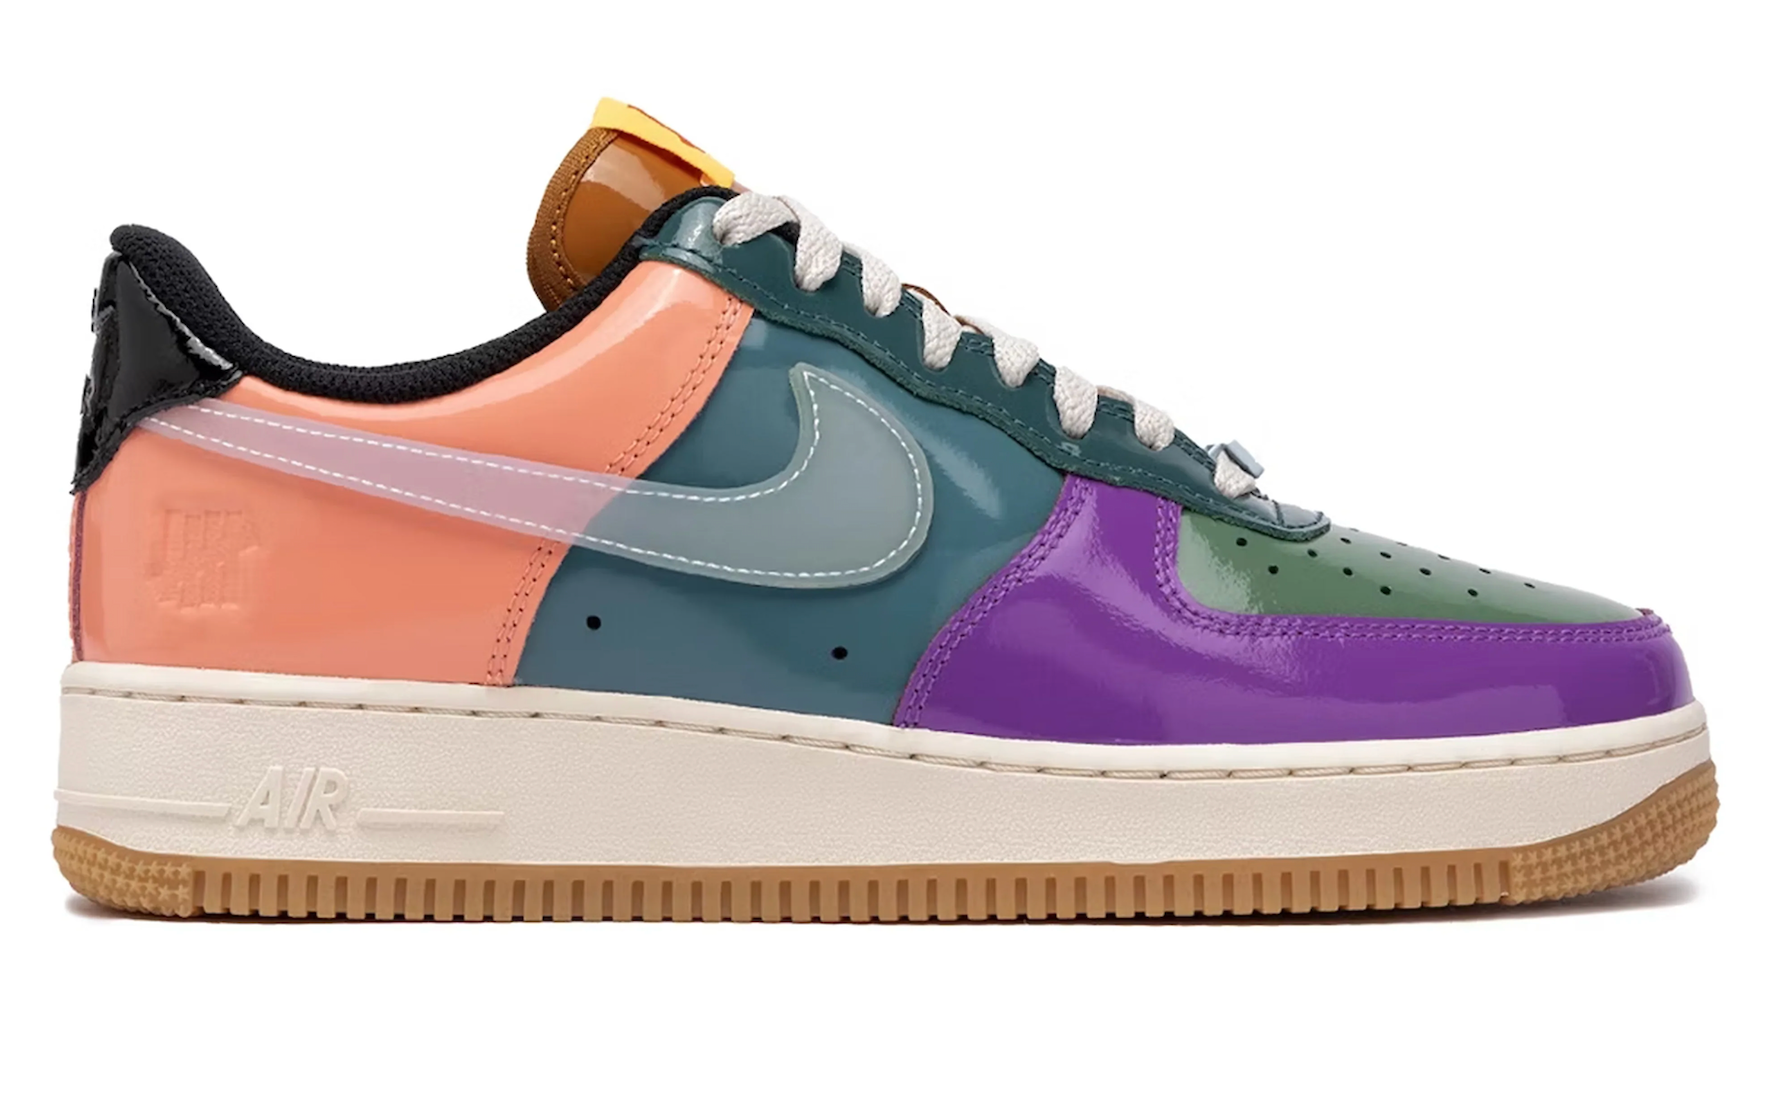 NIKE AIR FORCE 1 LOW UNDEFEATED MULTI-PATENT PURPLE GREEN - The Edit LDN